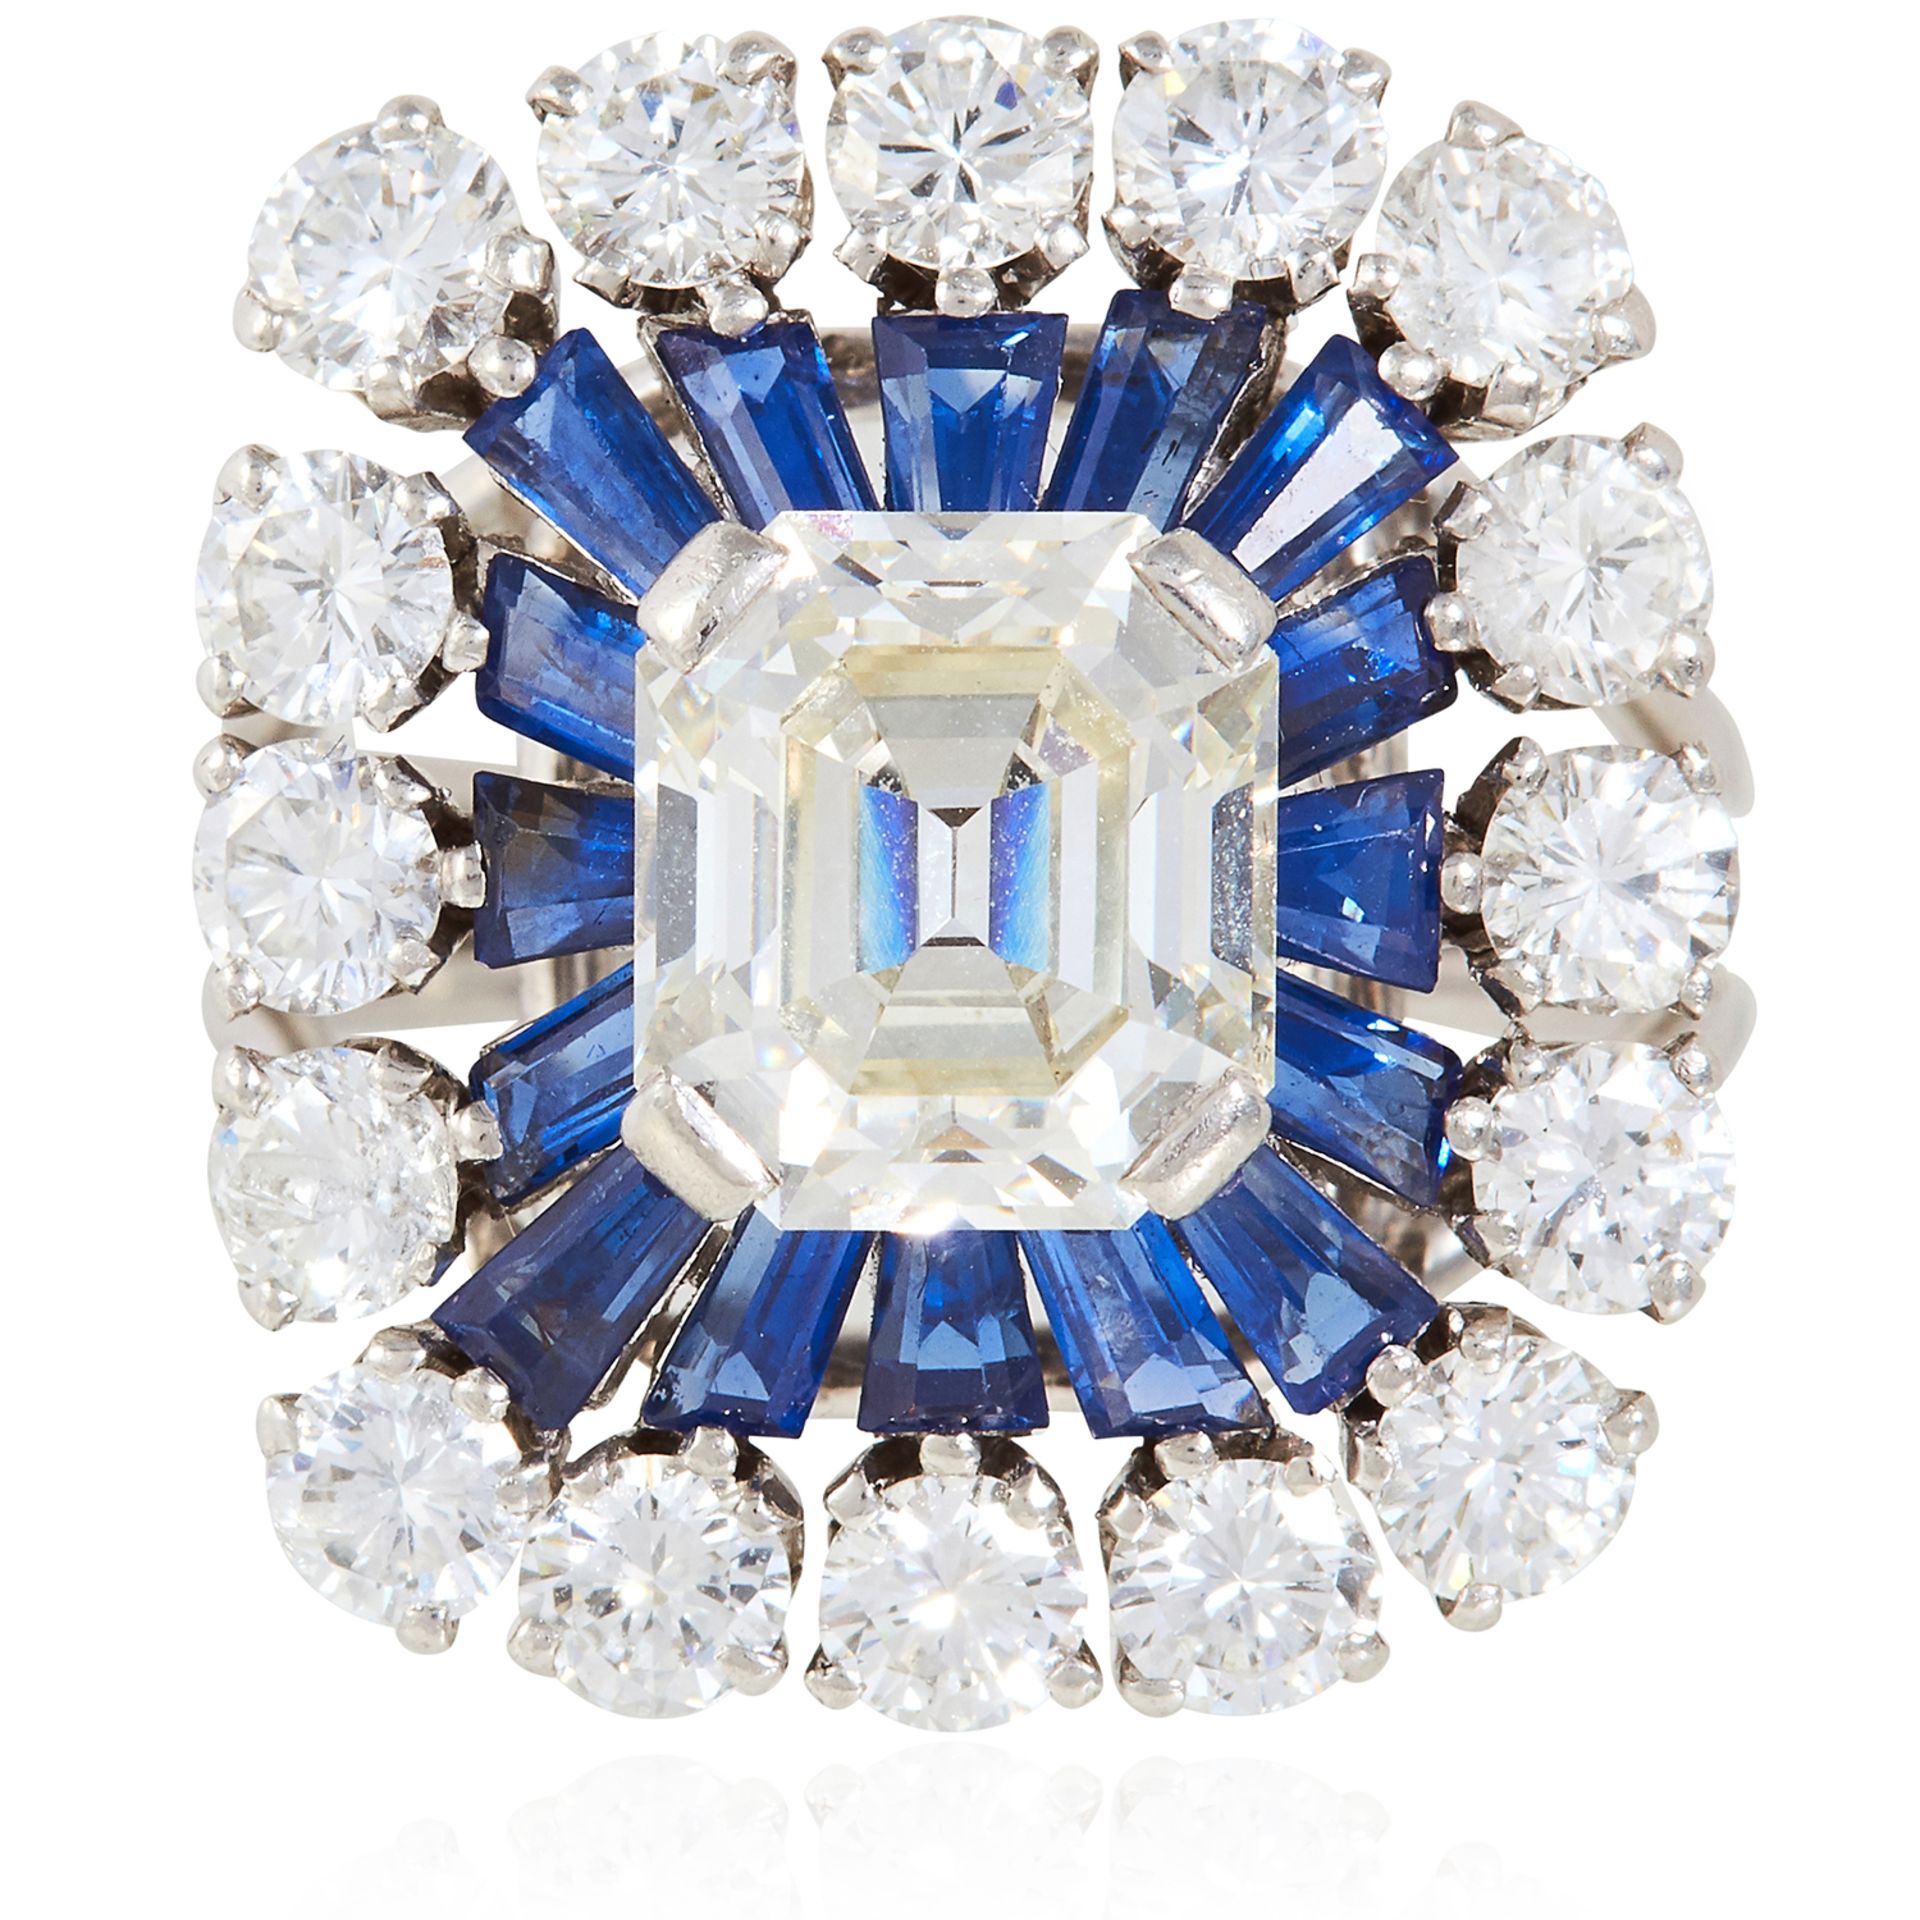 A SAPPHIRE AND DIAMOND DRESS RING in platinum, the central emerald cut diamond of approximately 2.45